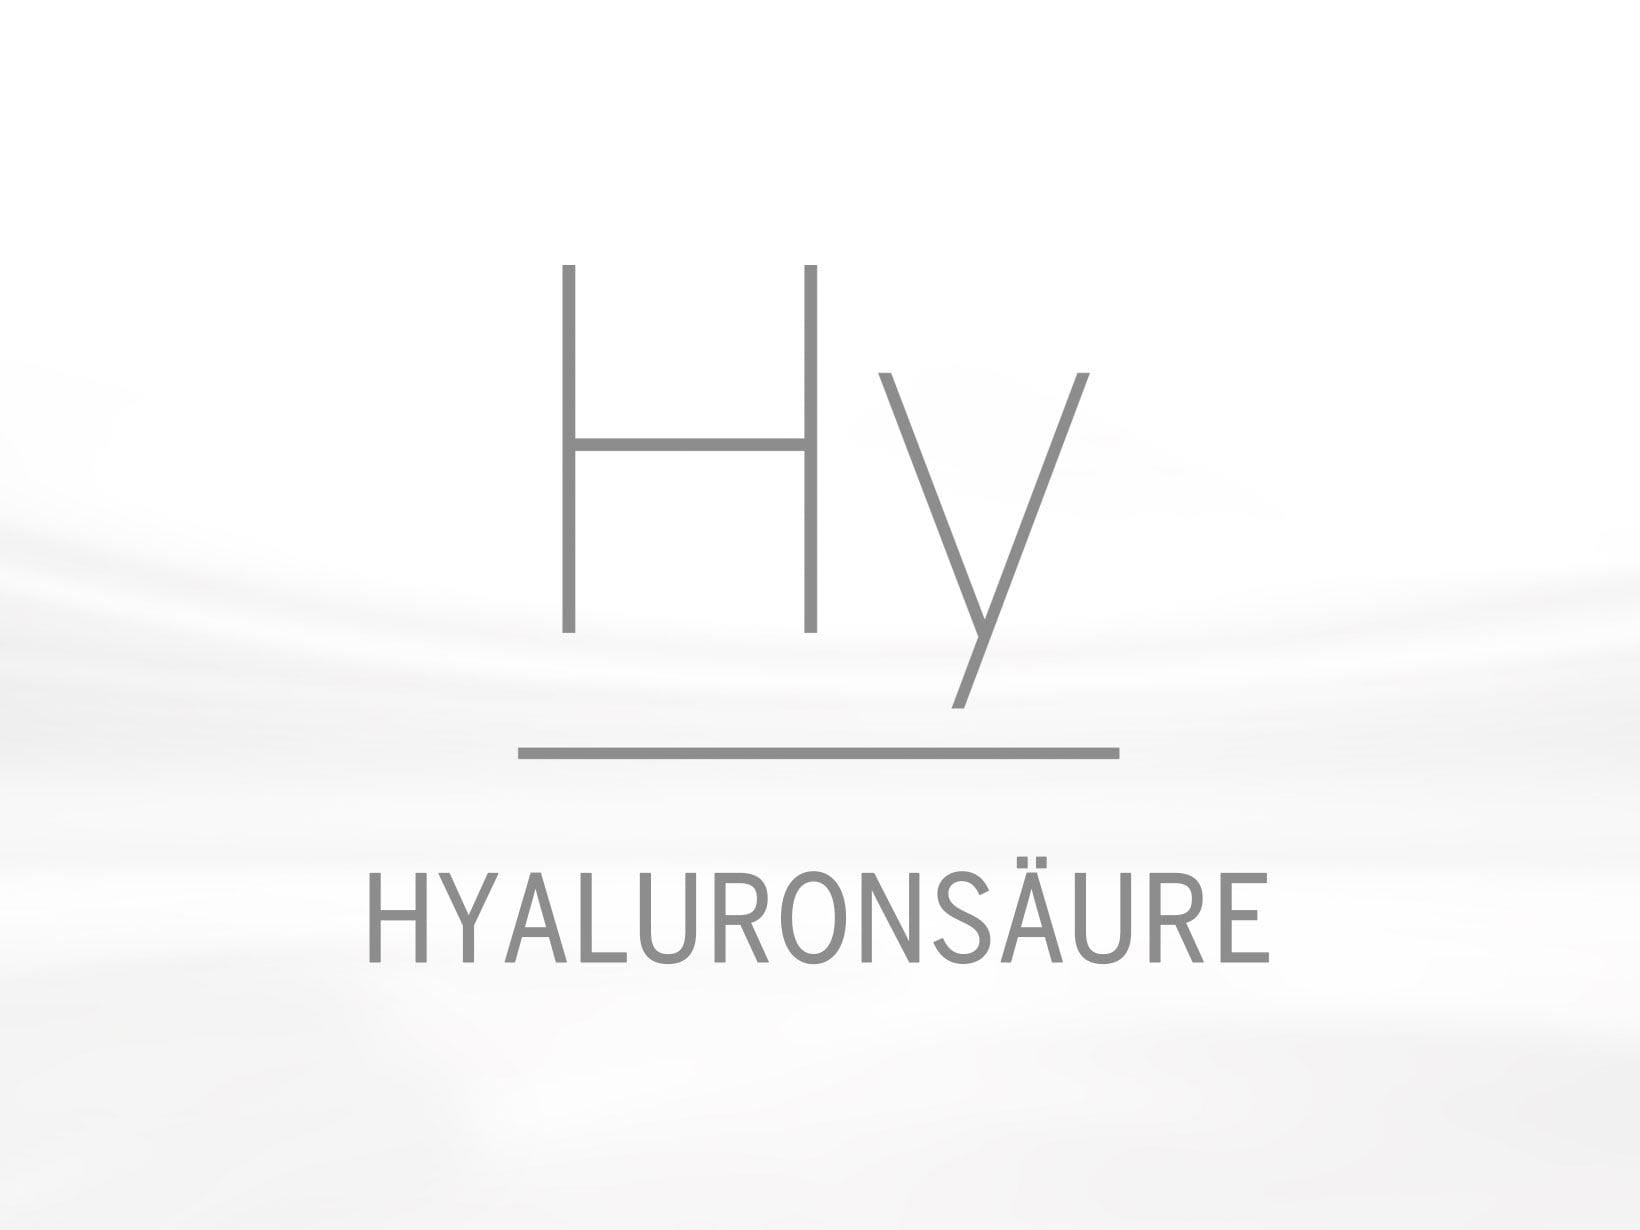 Hy = Hyaluronsäure